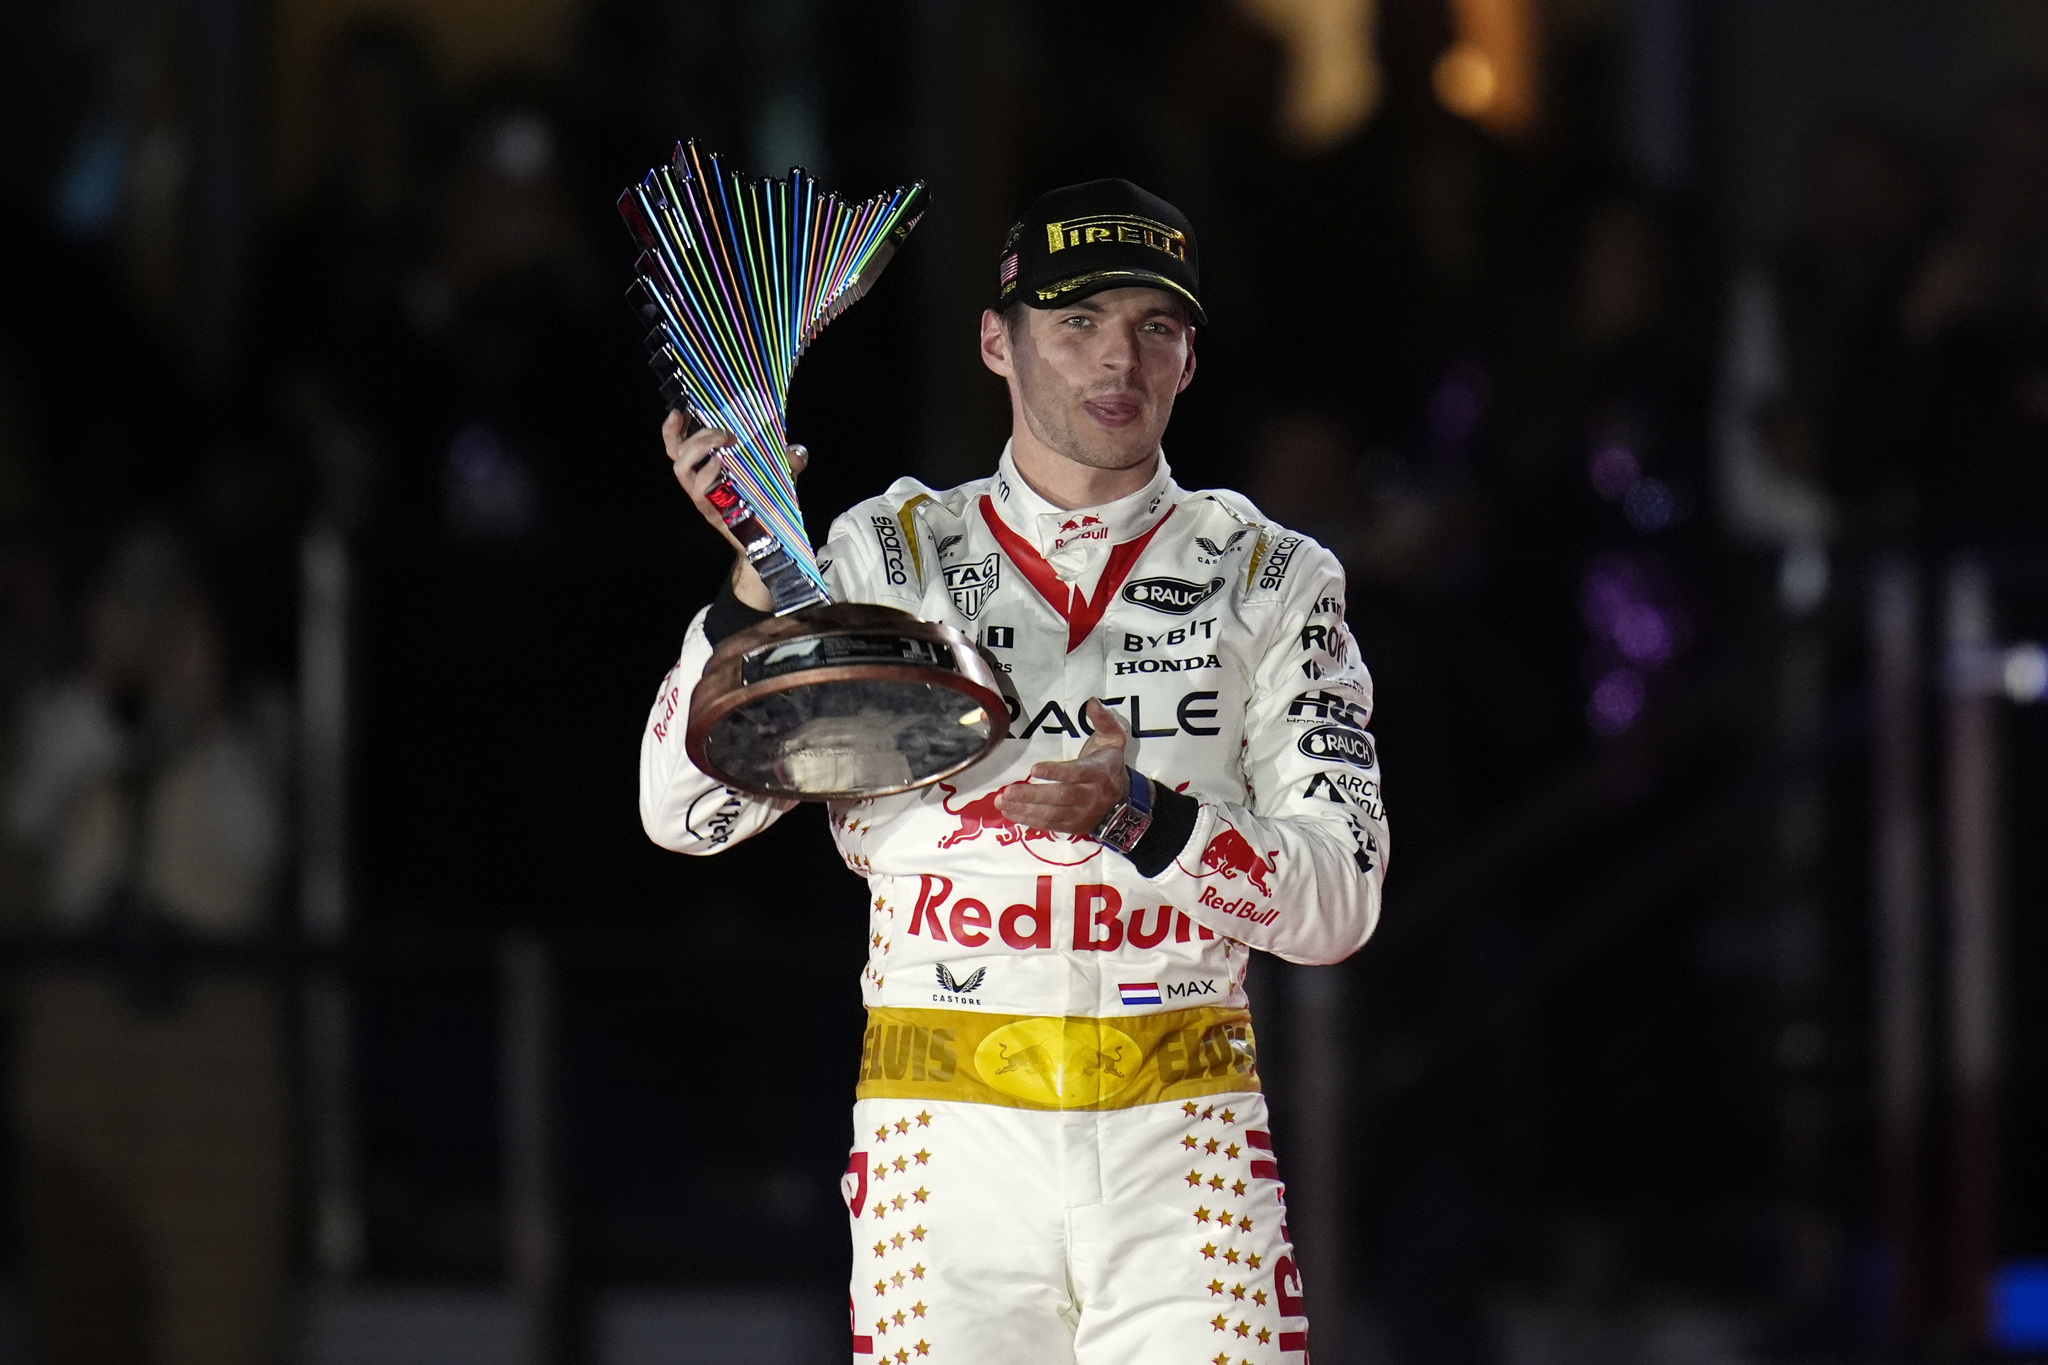 Red Bull driver Max Verstappen, of the Netherlands, holds a trophy after winning the Formula One Las Vegas Grand Prix.